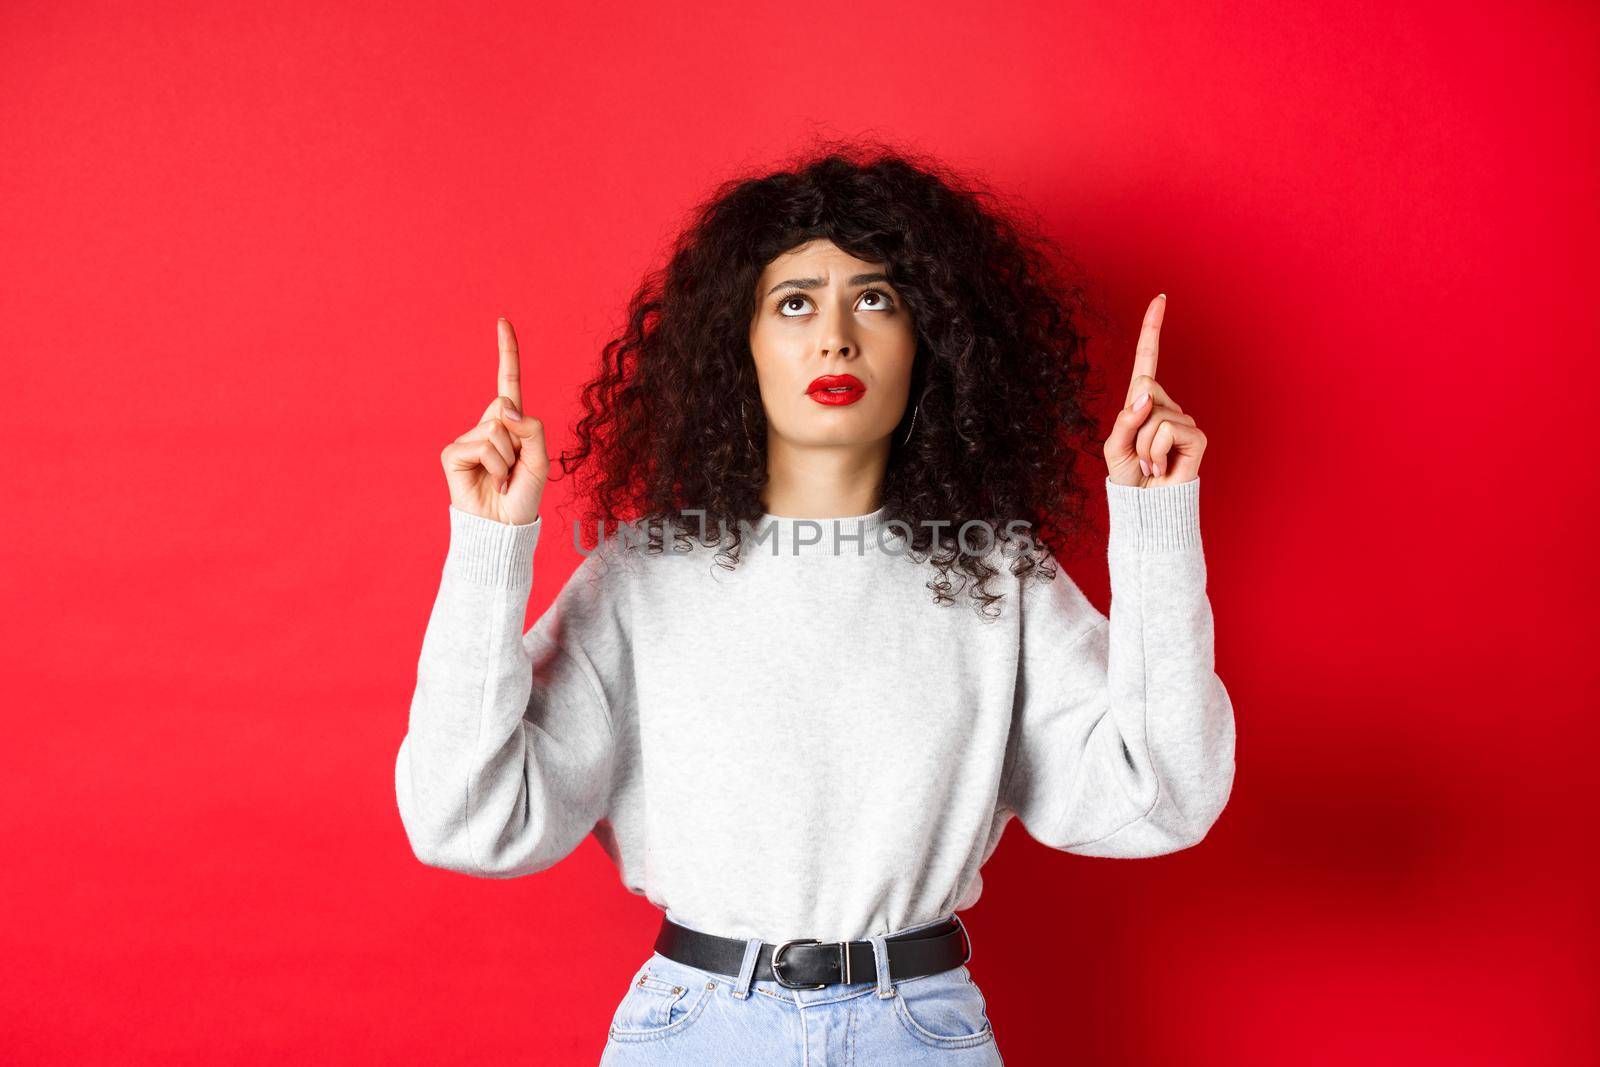 Concerned young woman with curly hair, frowning and looking doubtful, pointing up with hesitant or worried face, standing on red background.